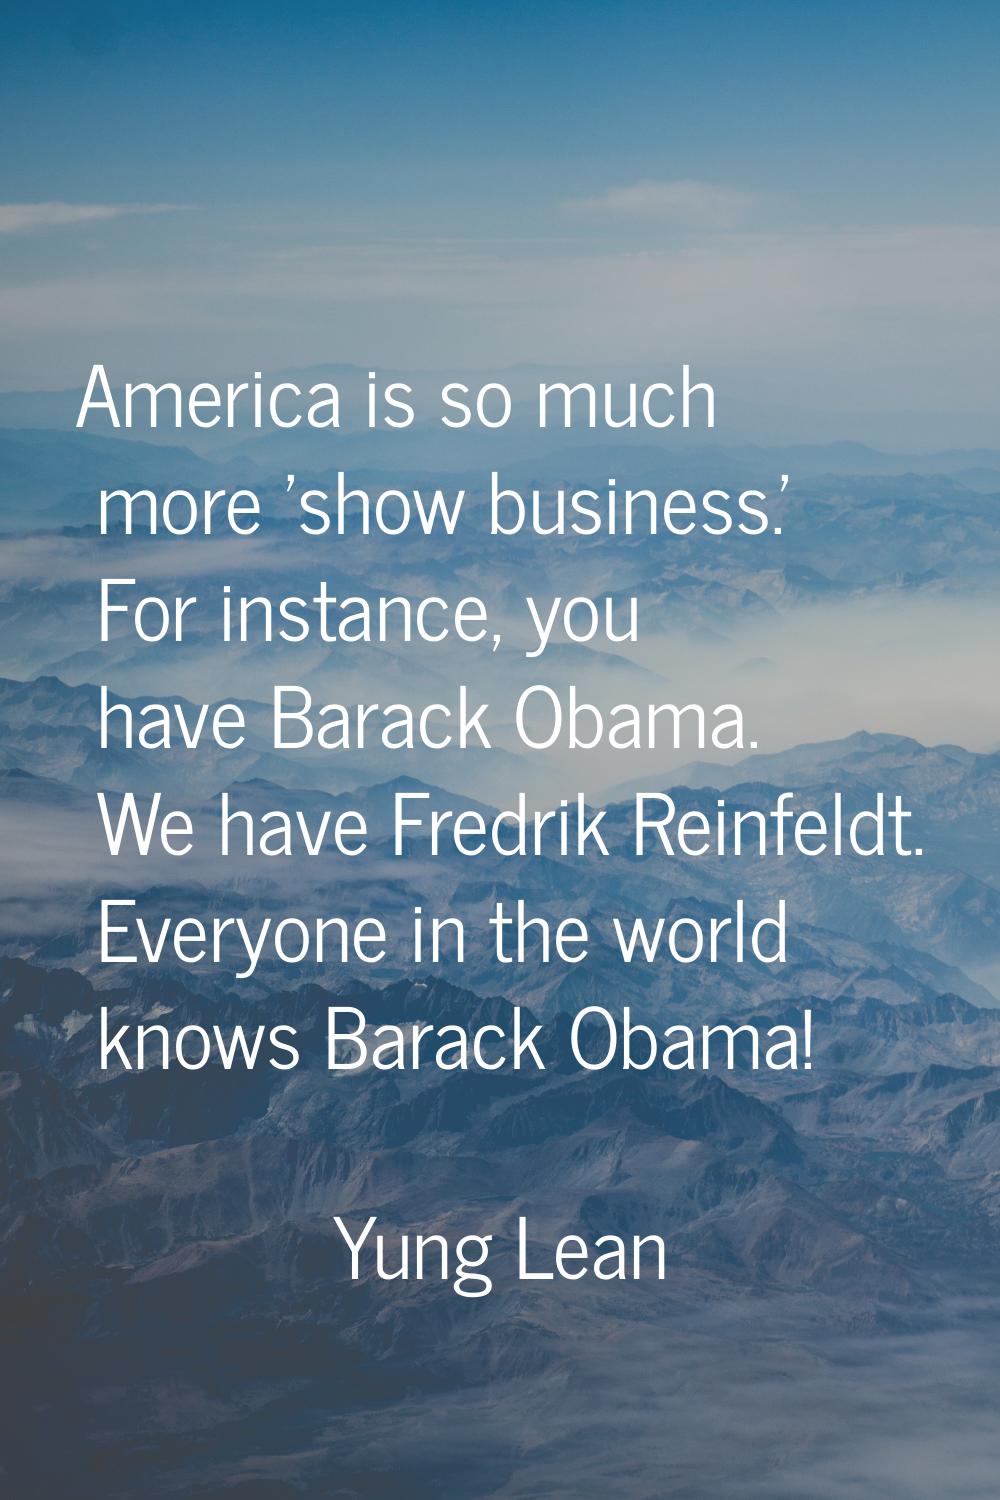 America is so much more 'show business.' For instance, you have Barack Obama. We have Fredrik Reinf